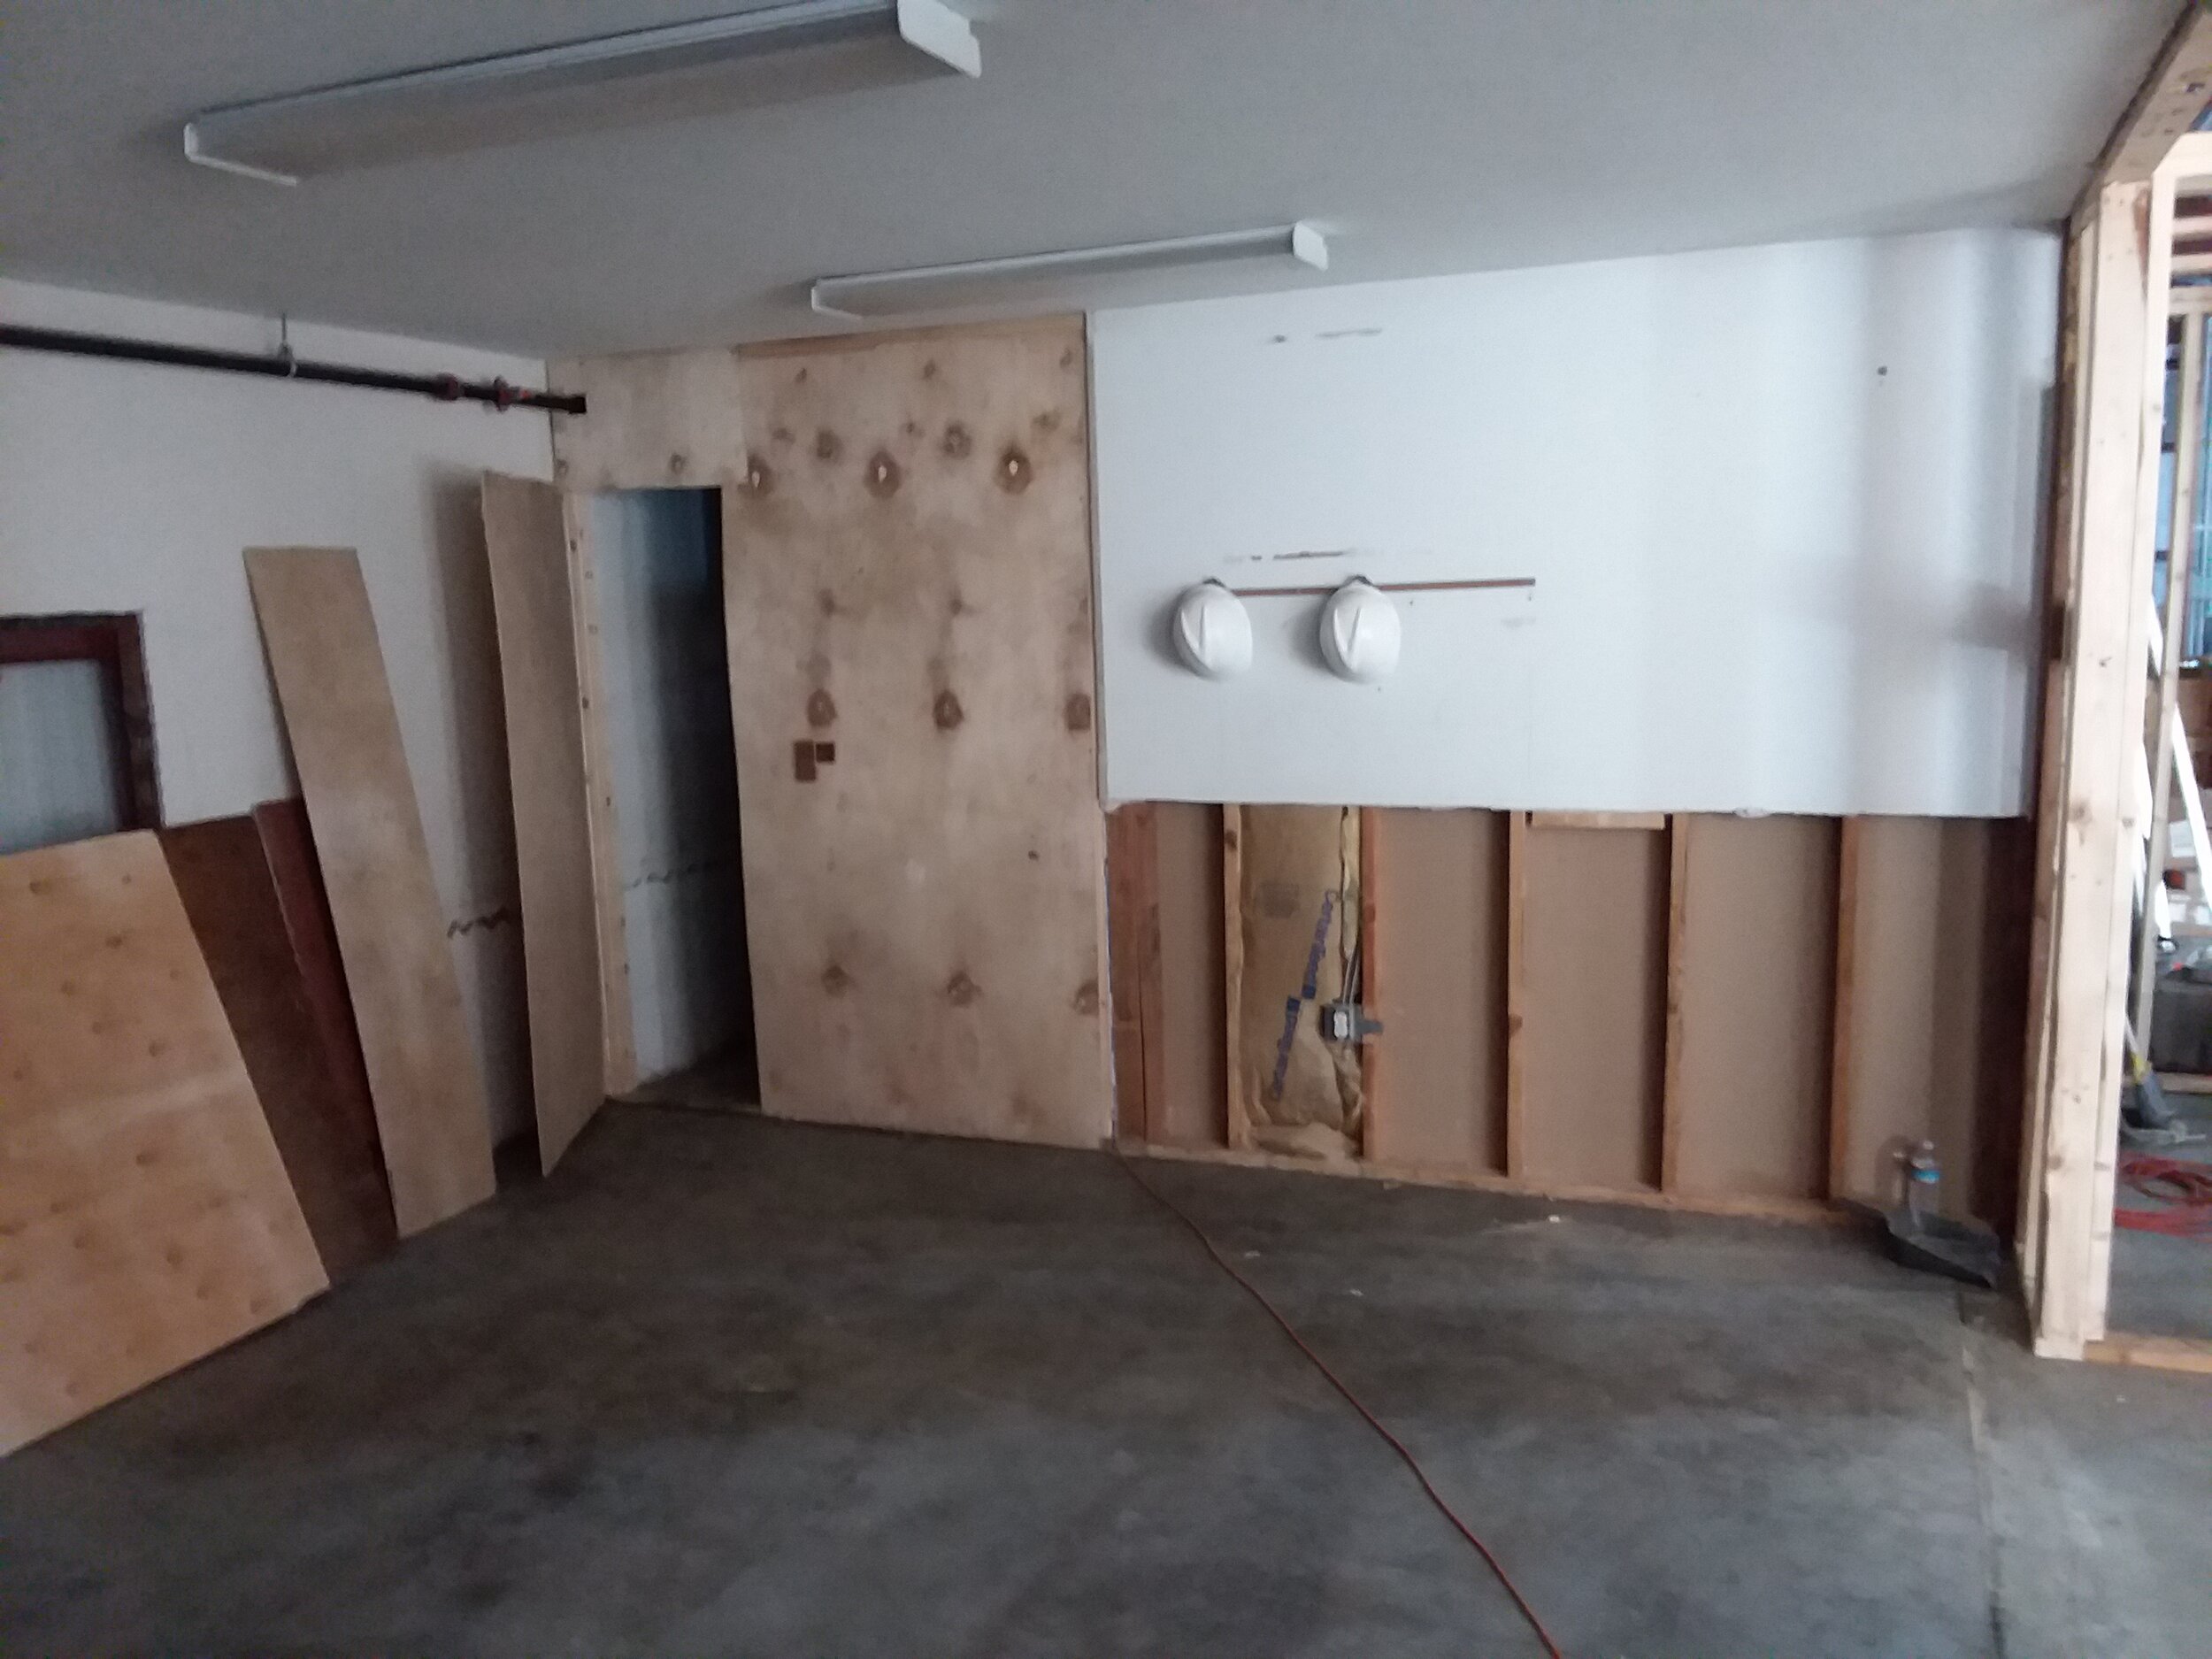 The entrance to a new accessible bathroom will be behind the plywood on the left.